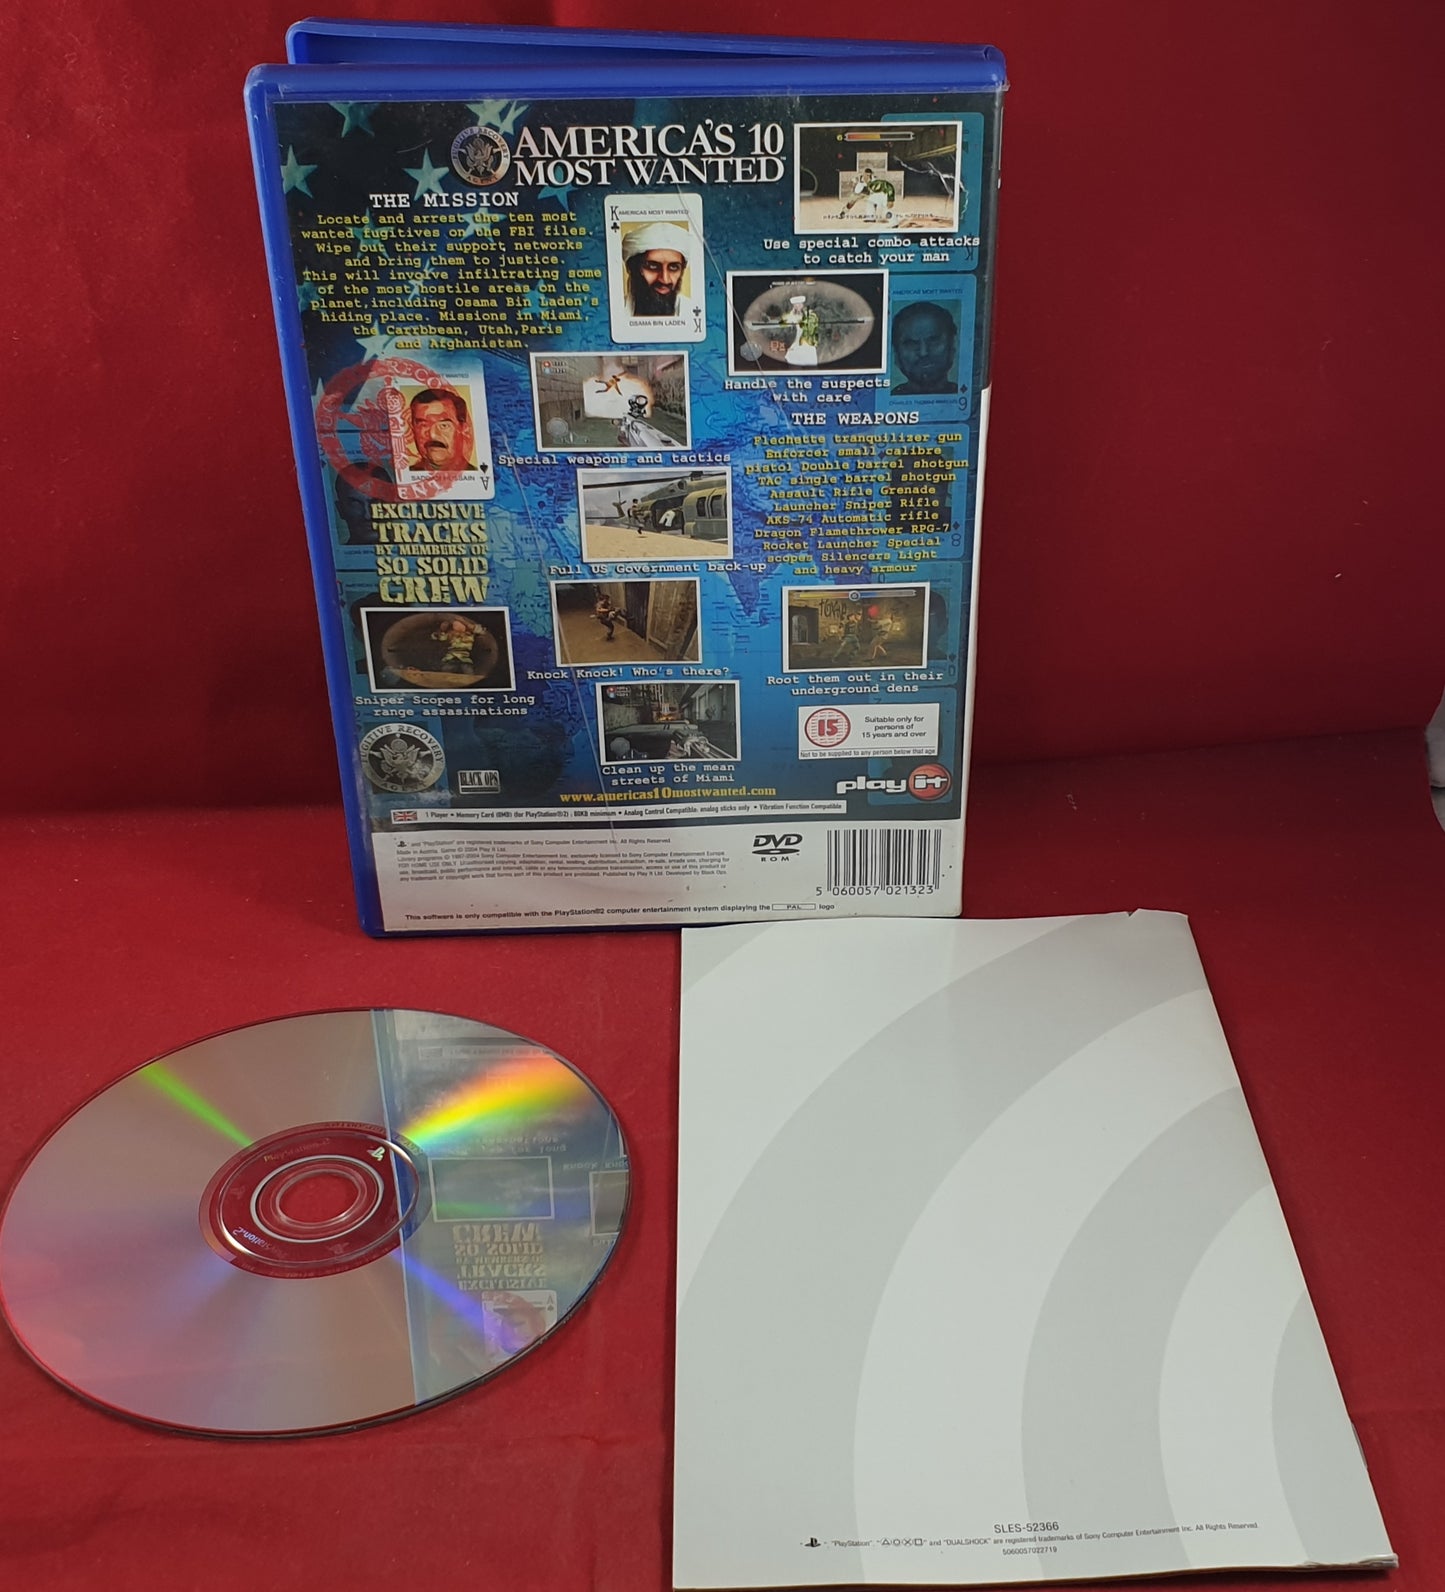 America's 10 Most Wanted AKA Fugitive Hunter: War on Terror Sony Playstation 2 (PS2) Game